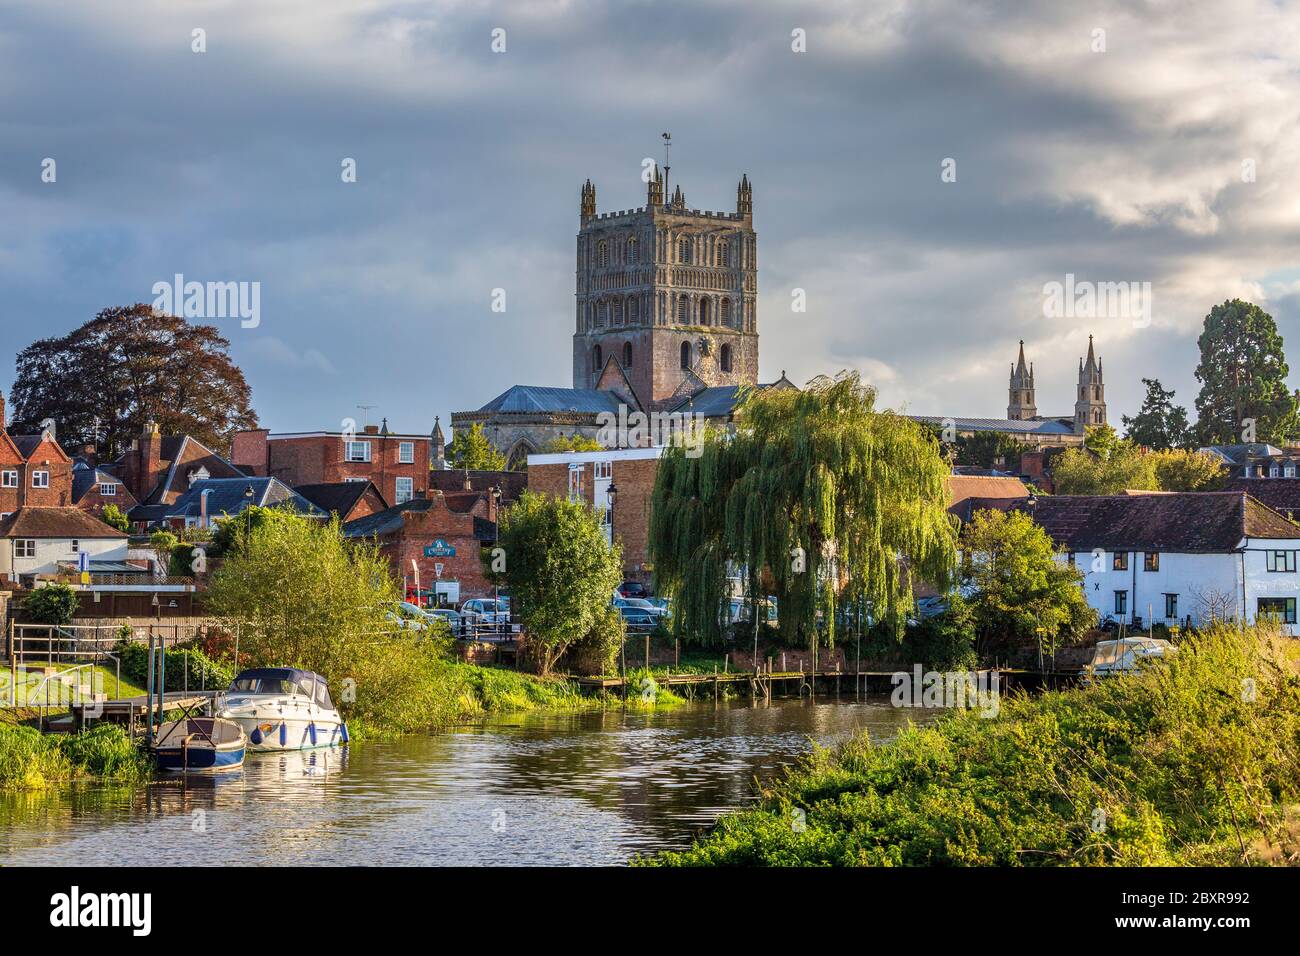 The Romanesque Tower of Tewkesbury Abbey Church along the Avon in Gloucestershire, England Stock Photo